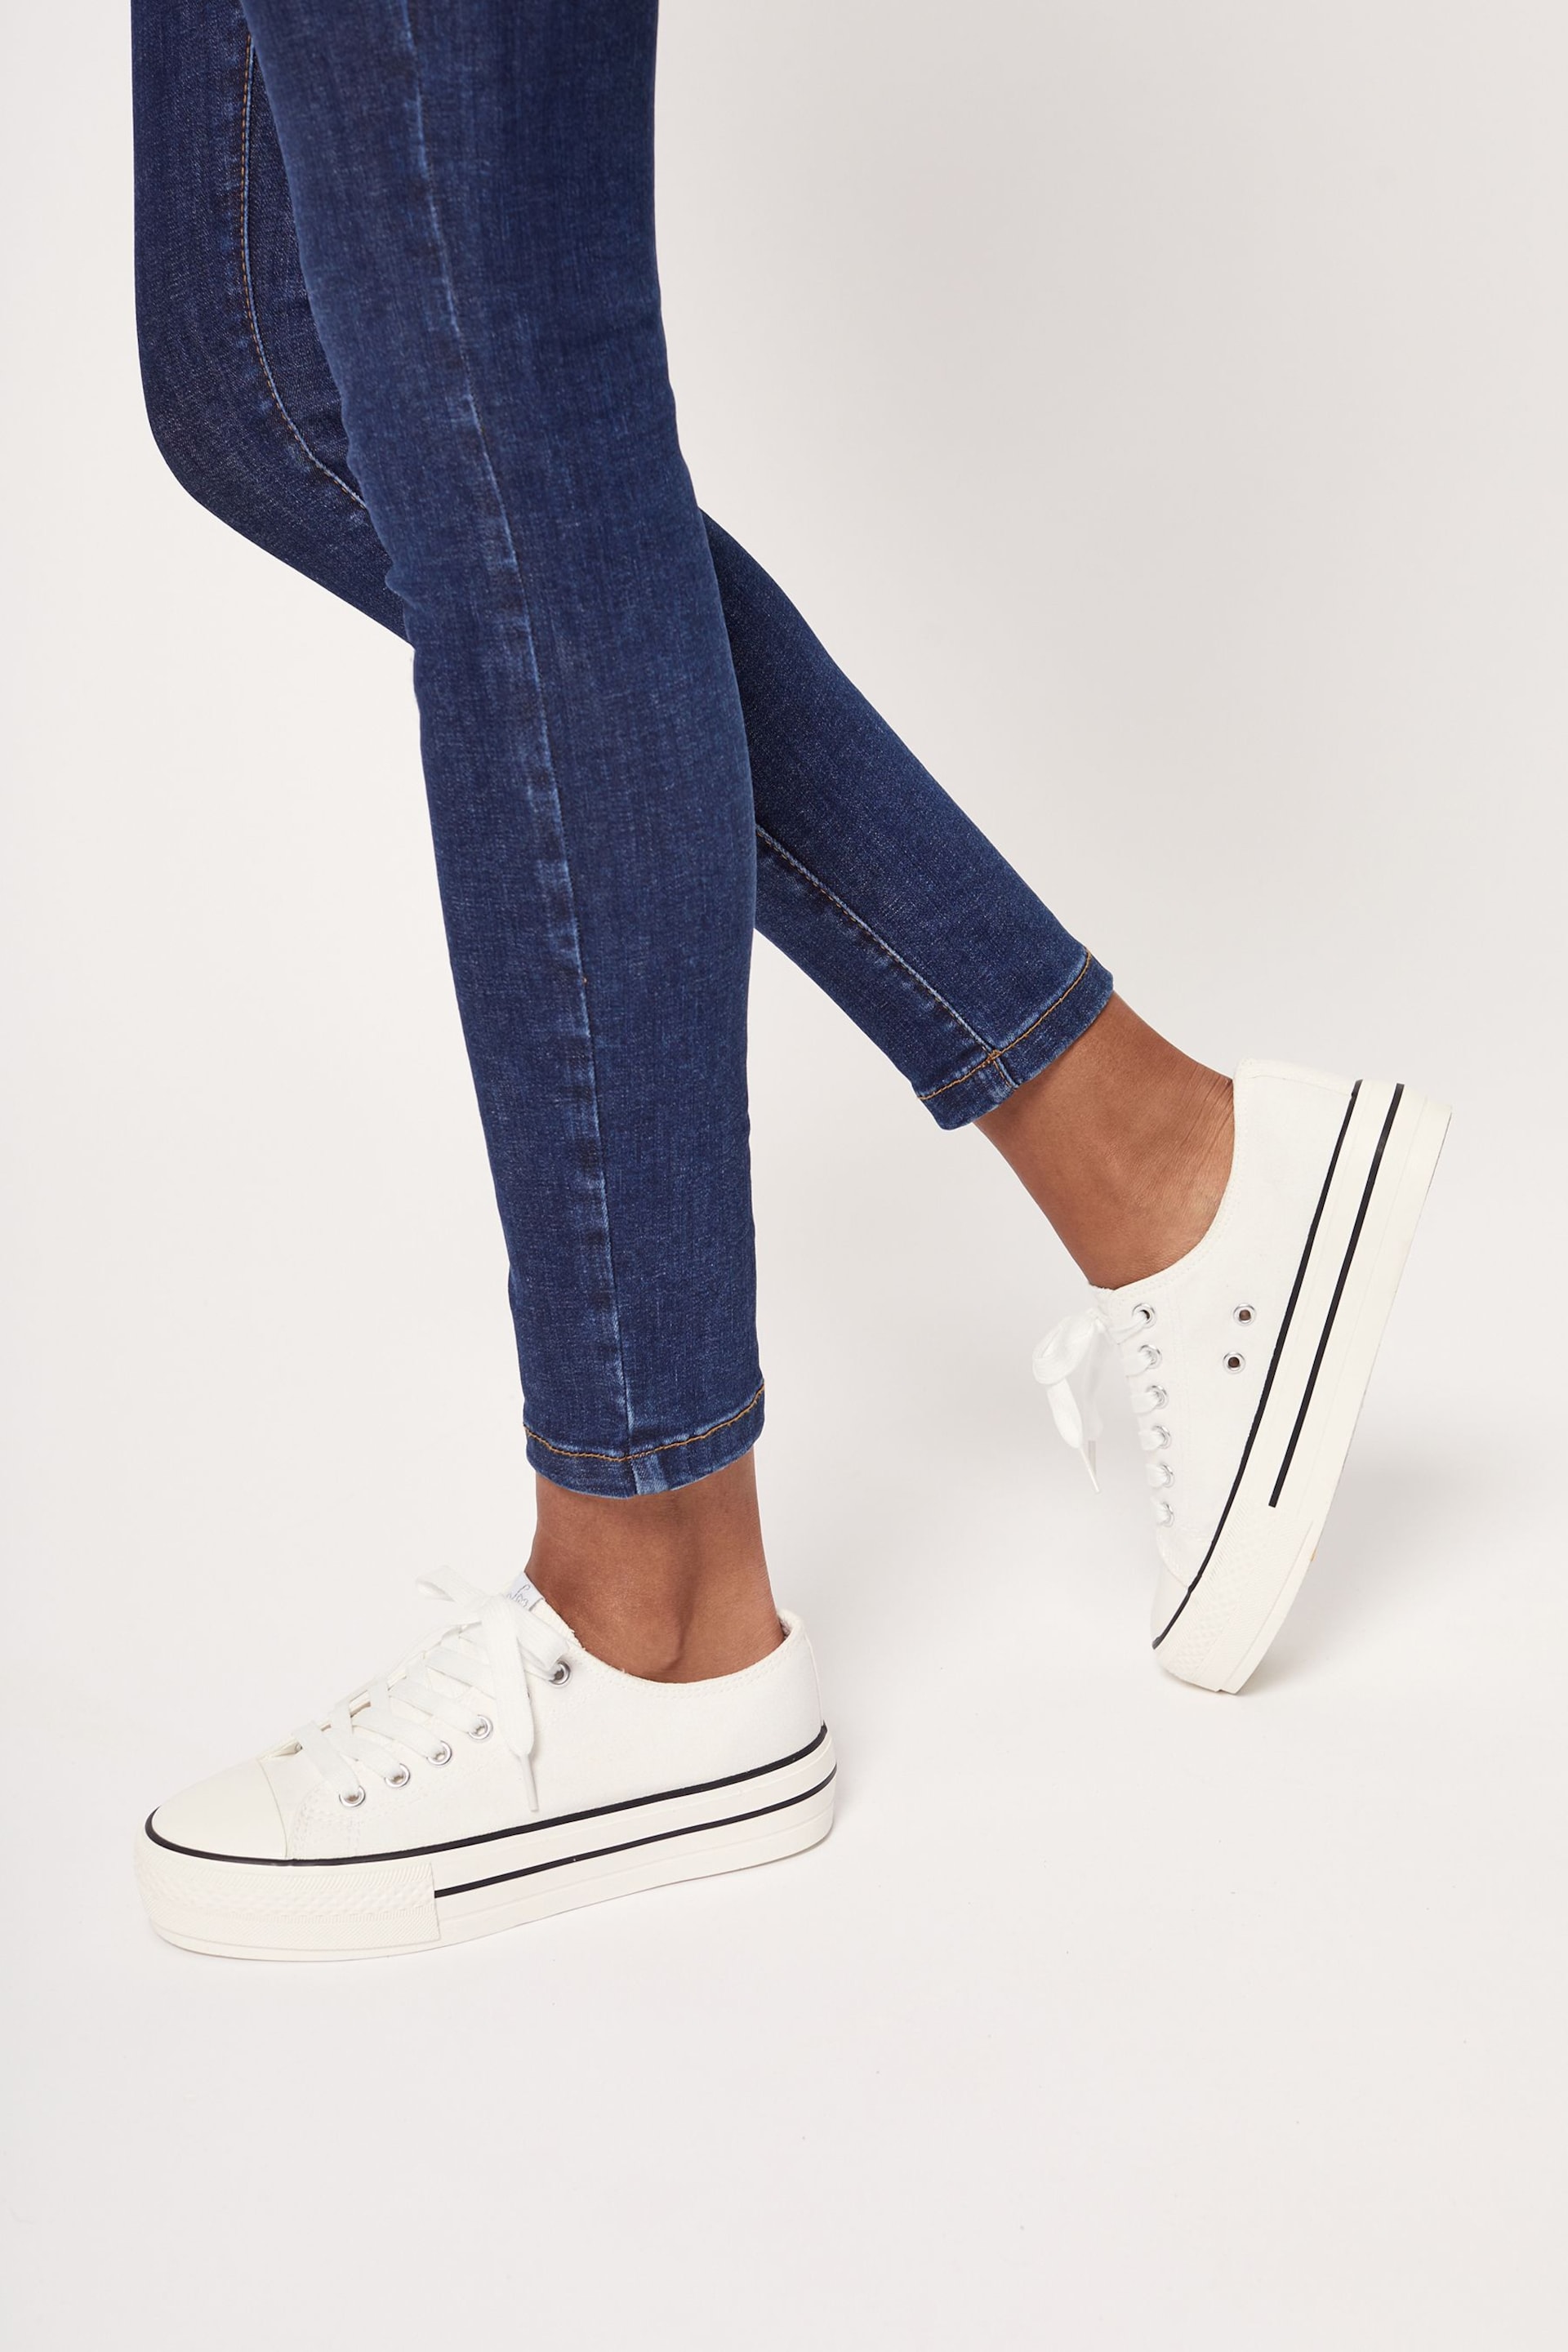 Lipsy White Wide Fit Flatform Lace Up Canvas Chunky Trainer - Image 4 of 4